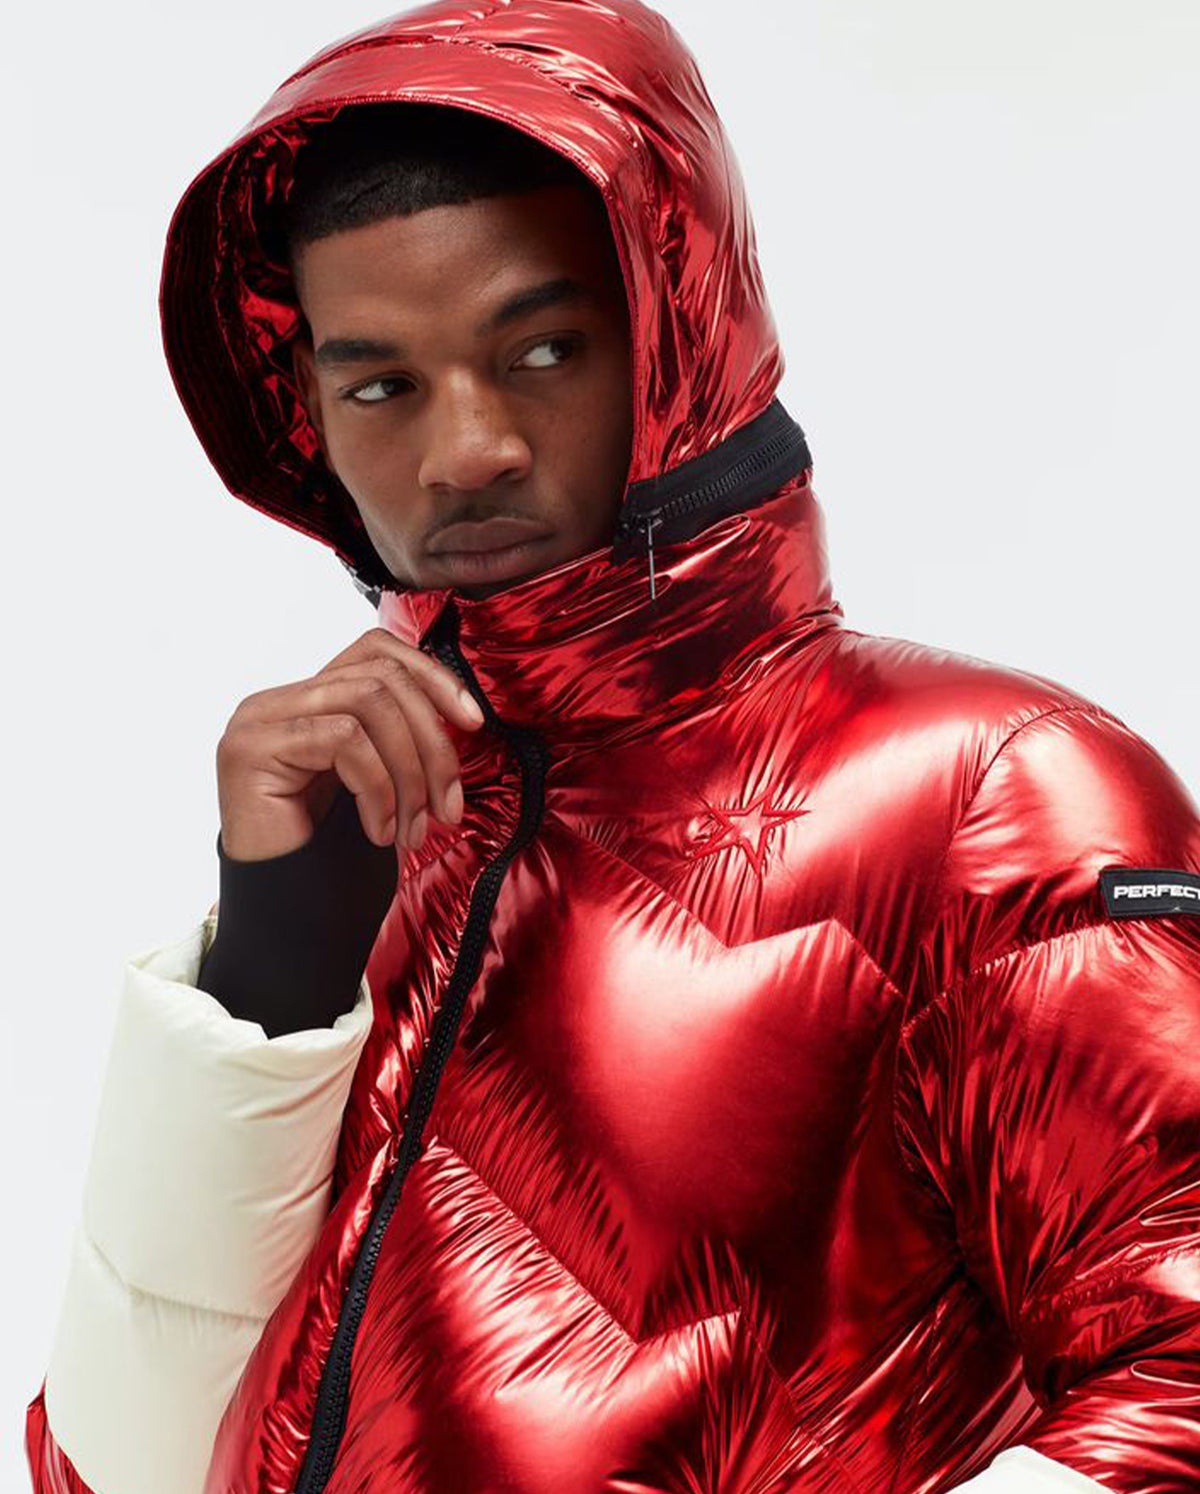 Airview Duvet Down Jacket - Red